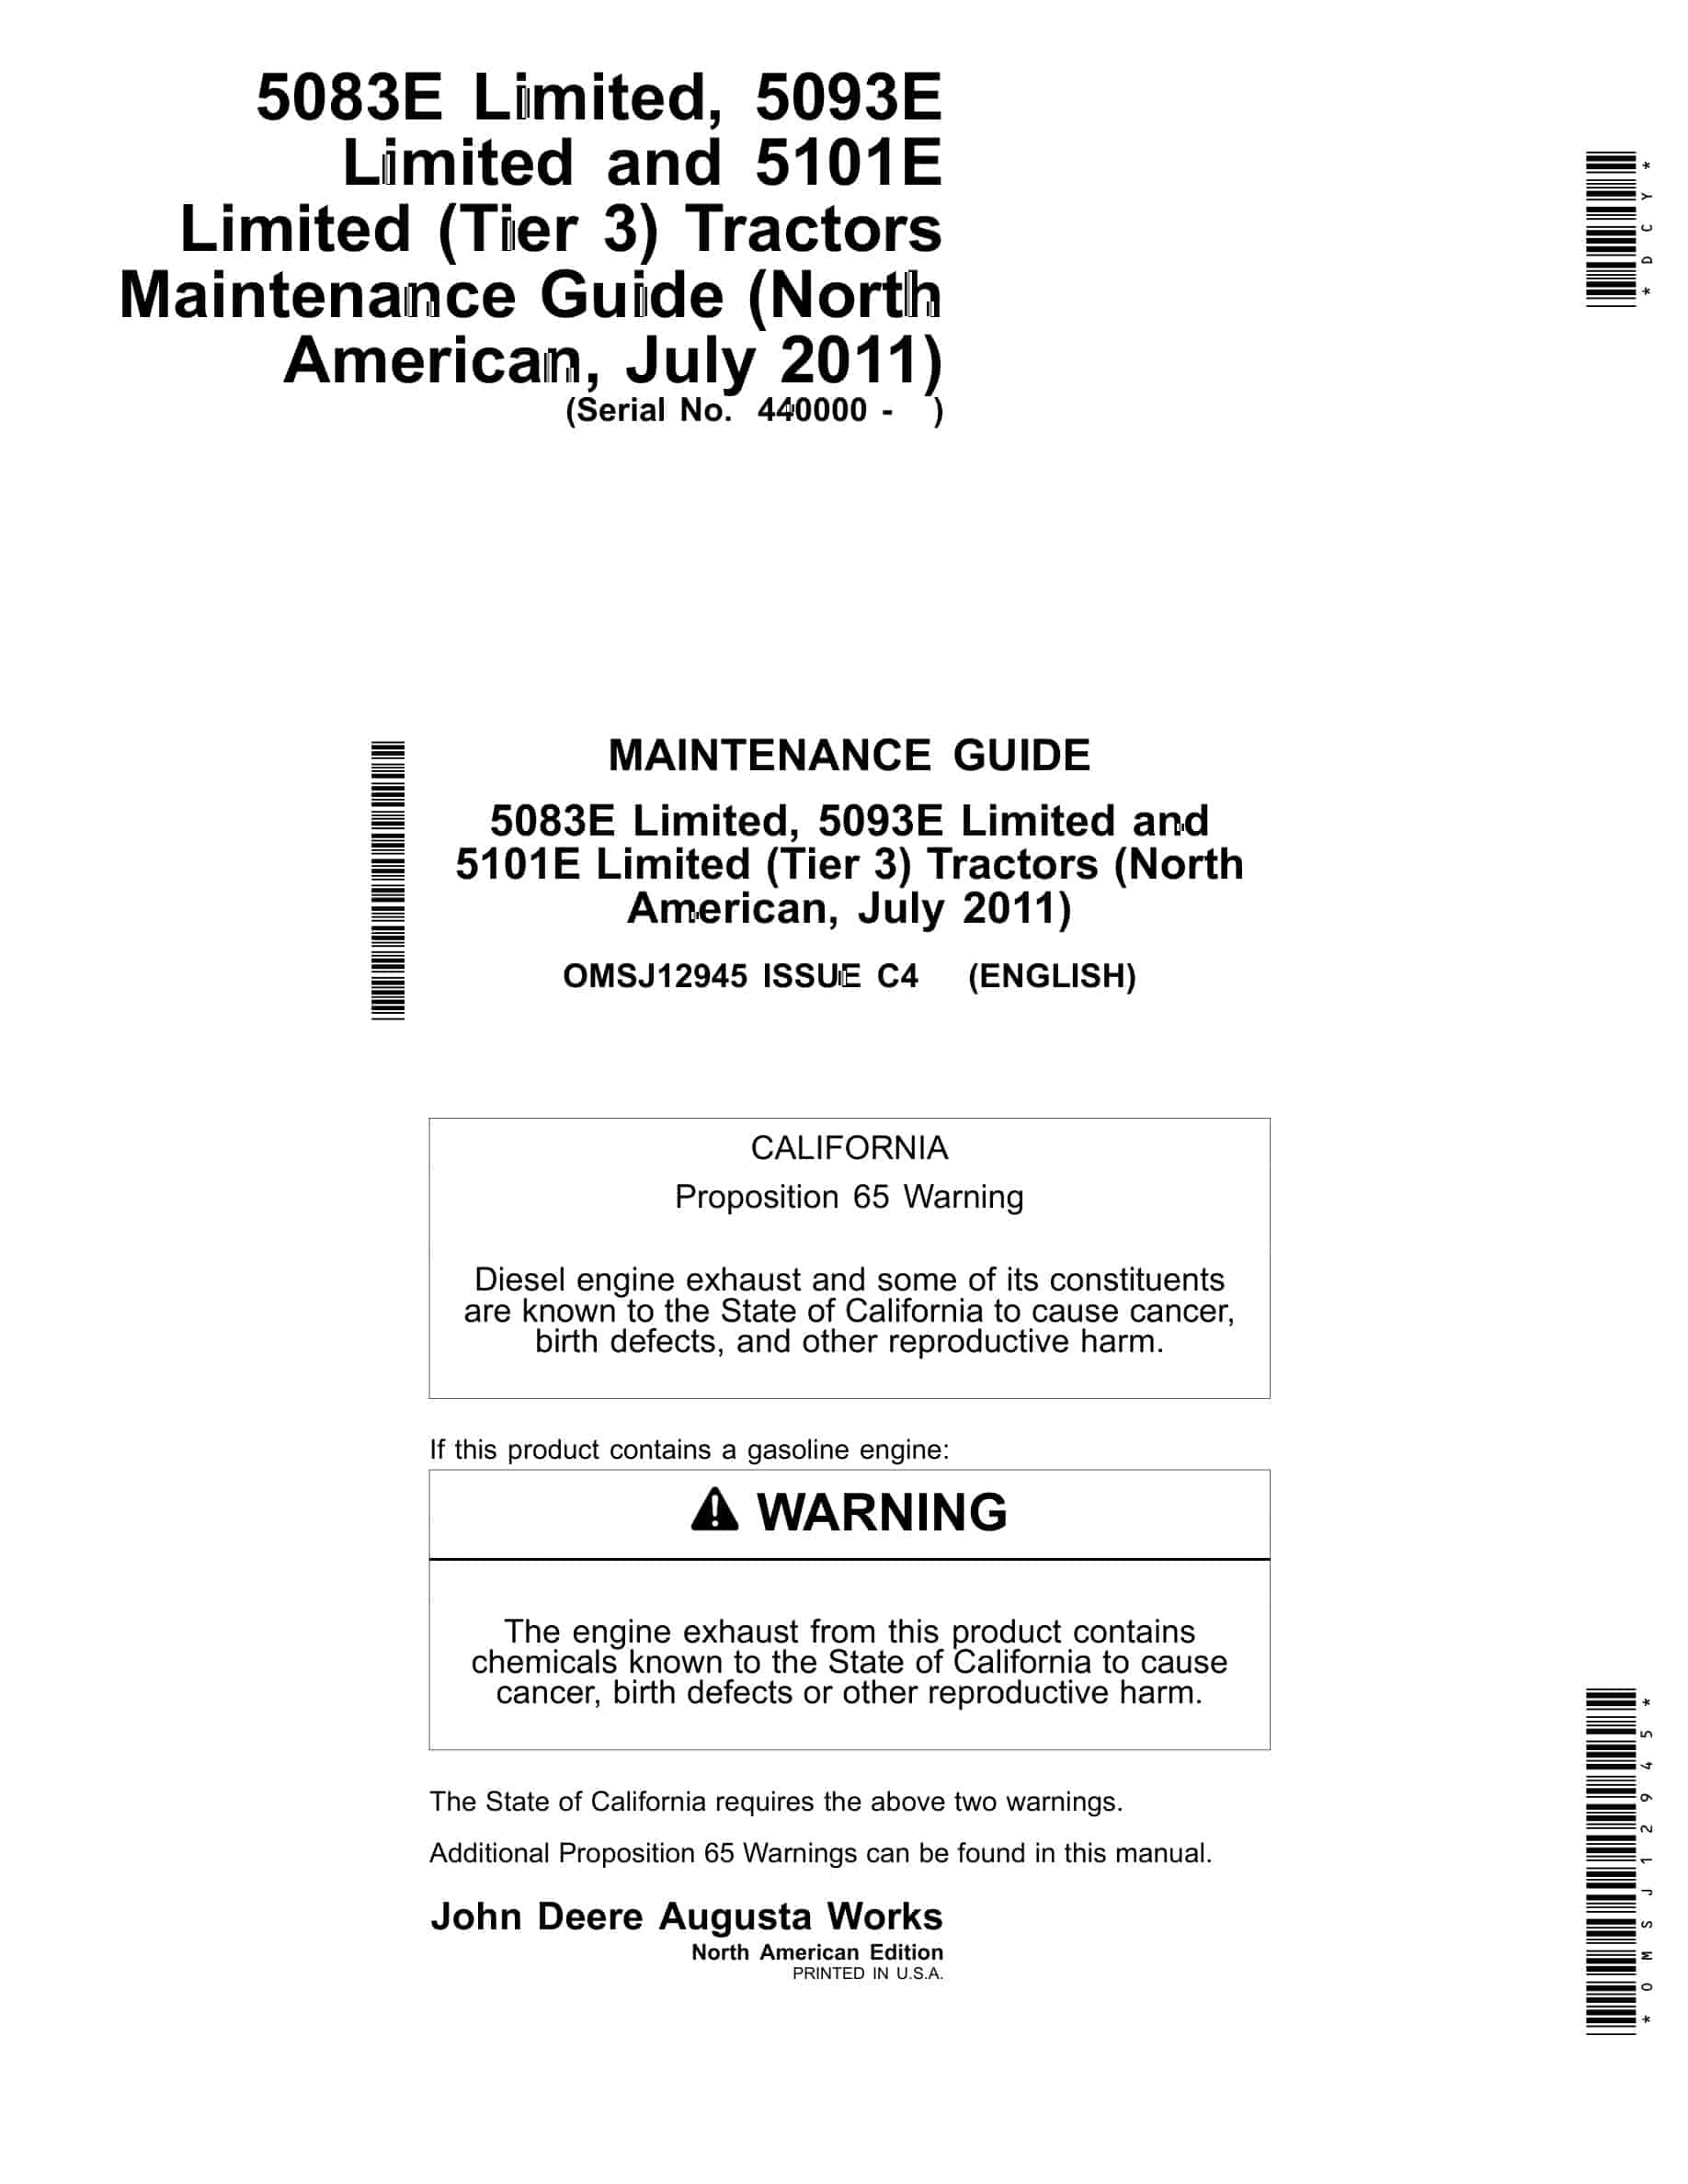 John Deere 5083E Limited, 5093E Limited and 5101E Limited (Tier 3) Tractor Operator Manual OMSJ12945-1